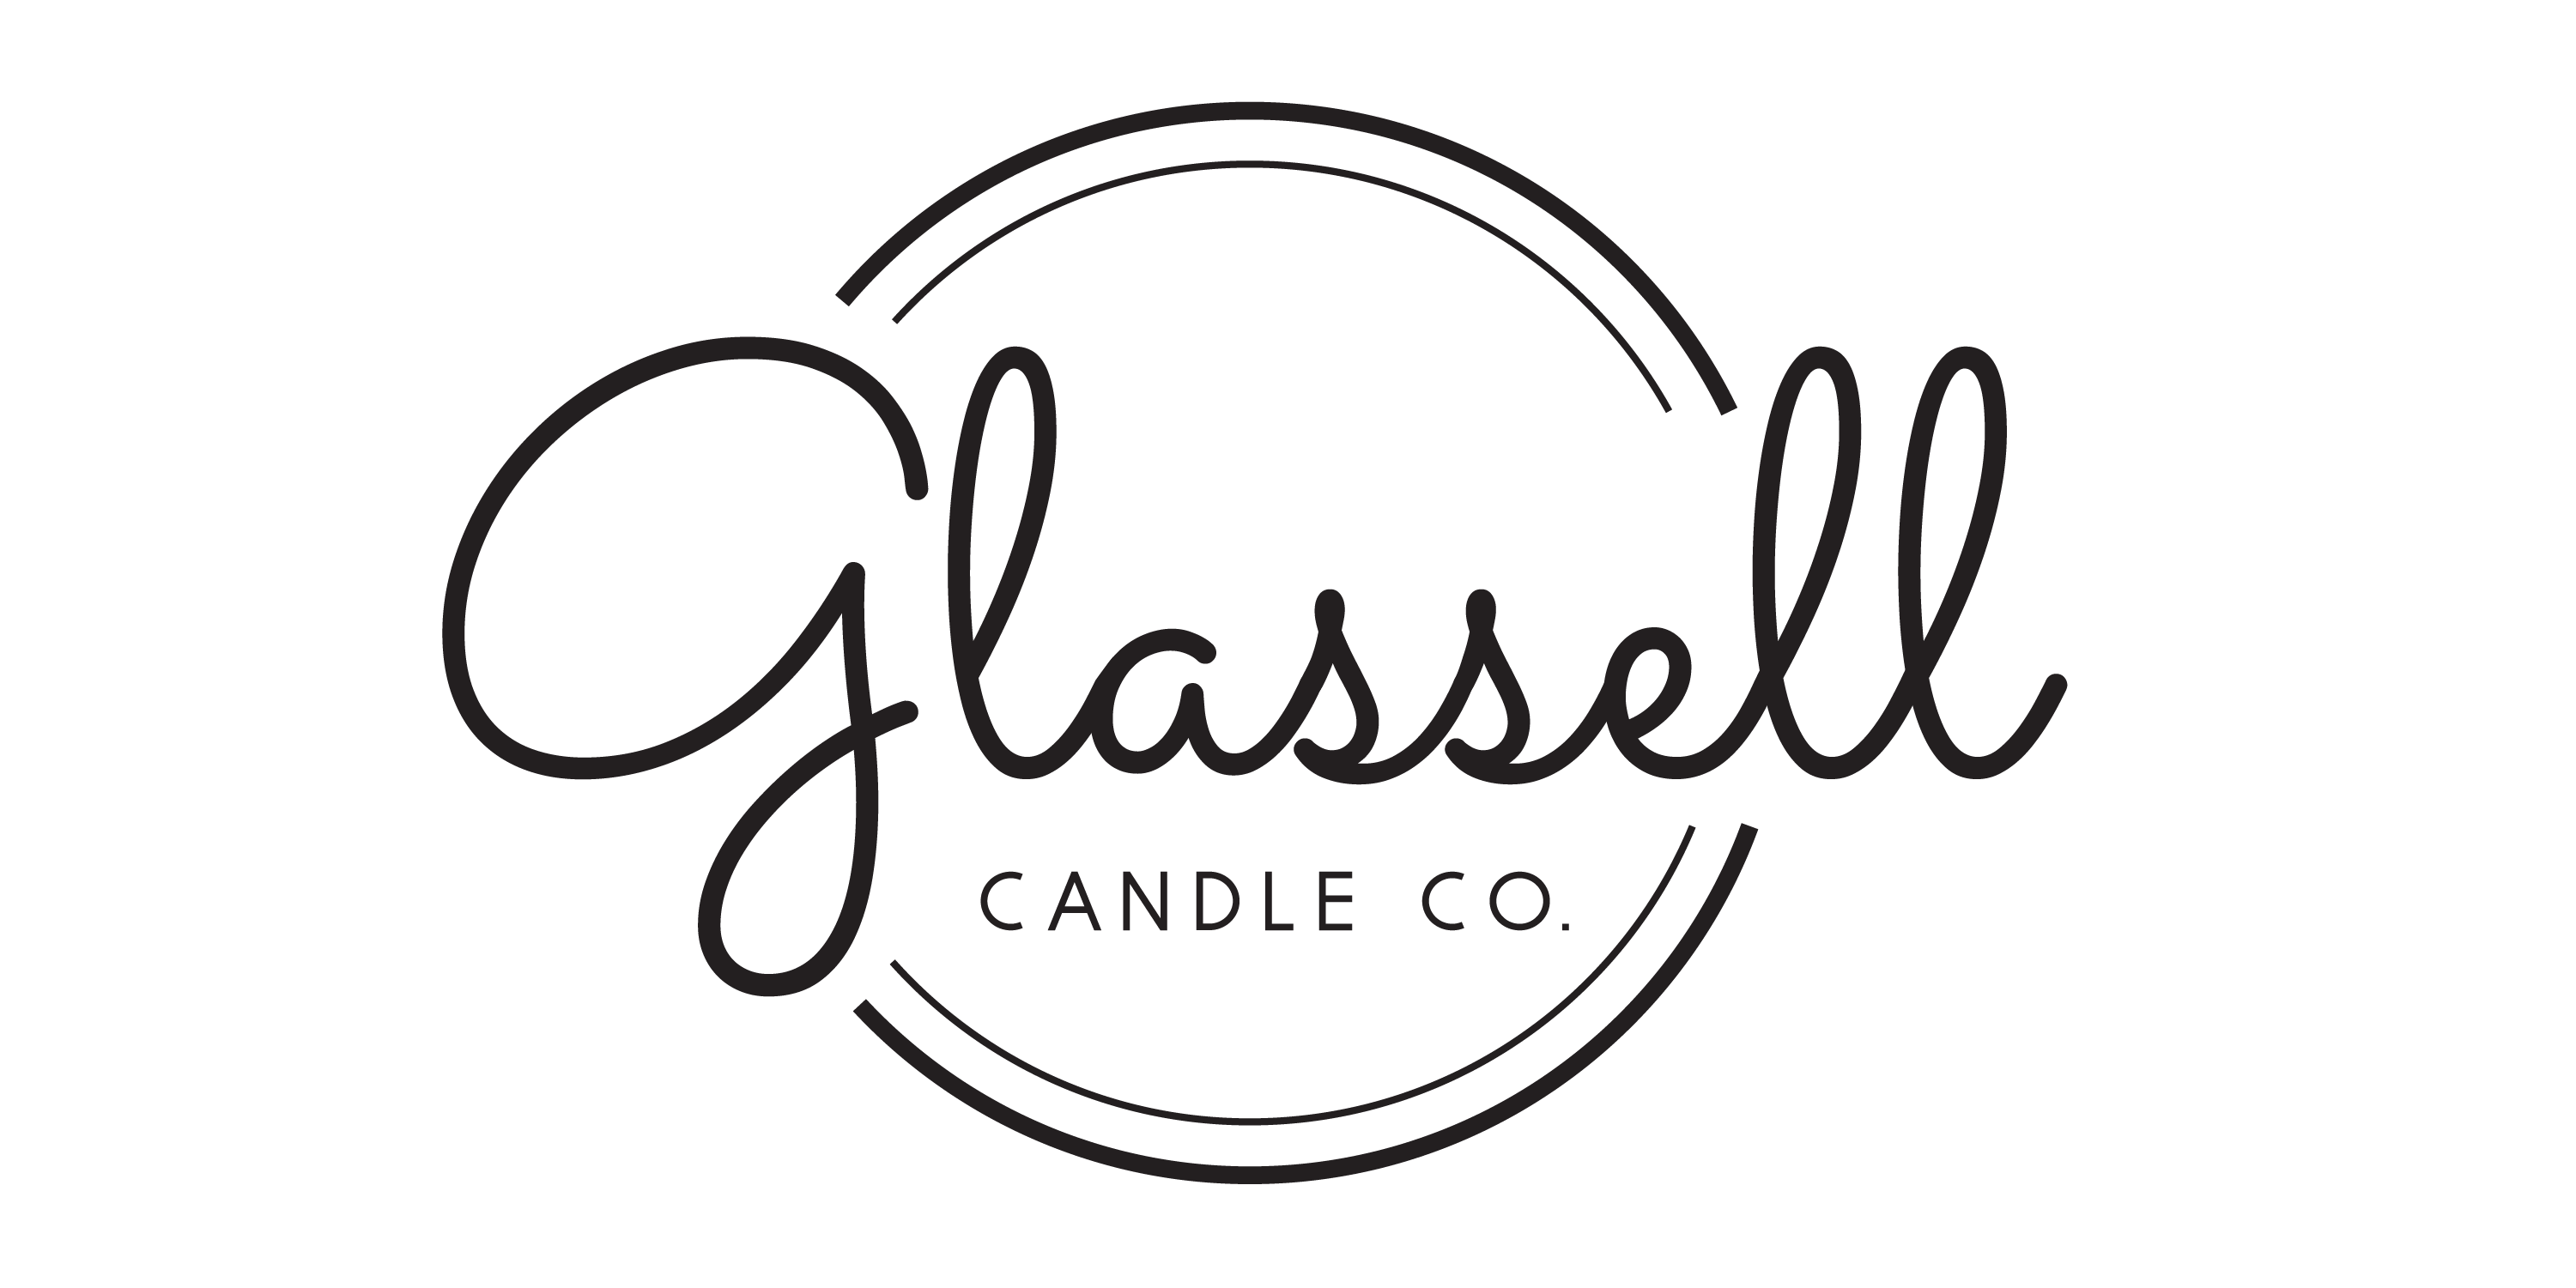 glassell candle logo